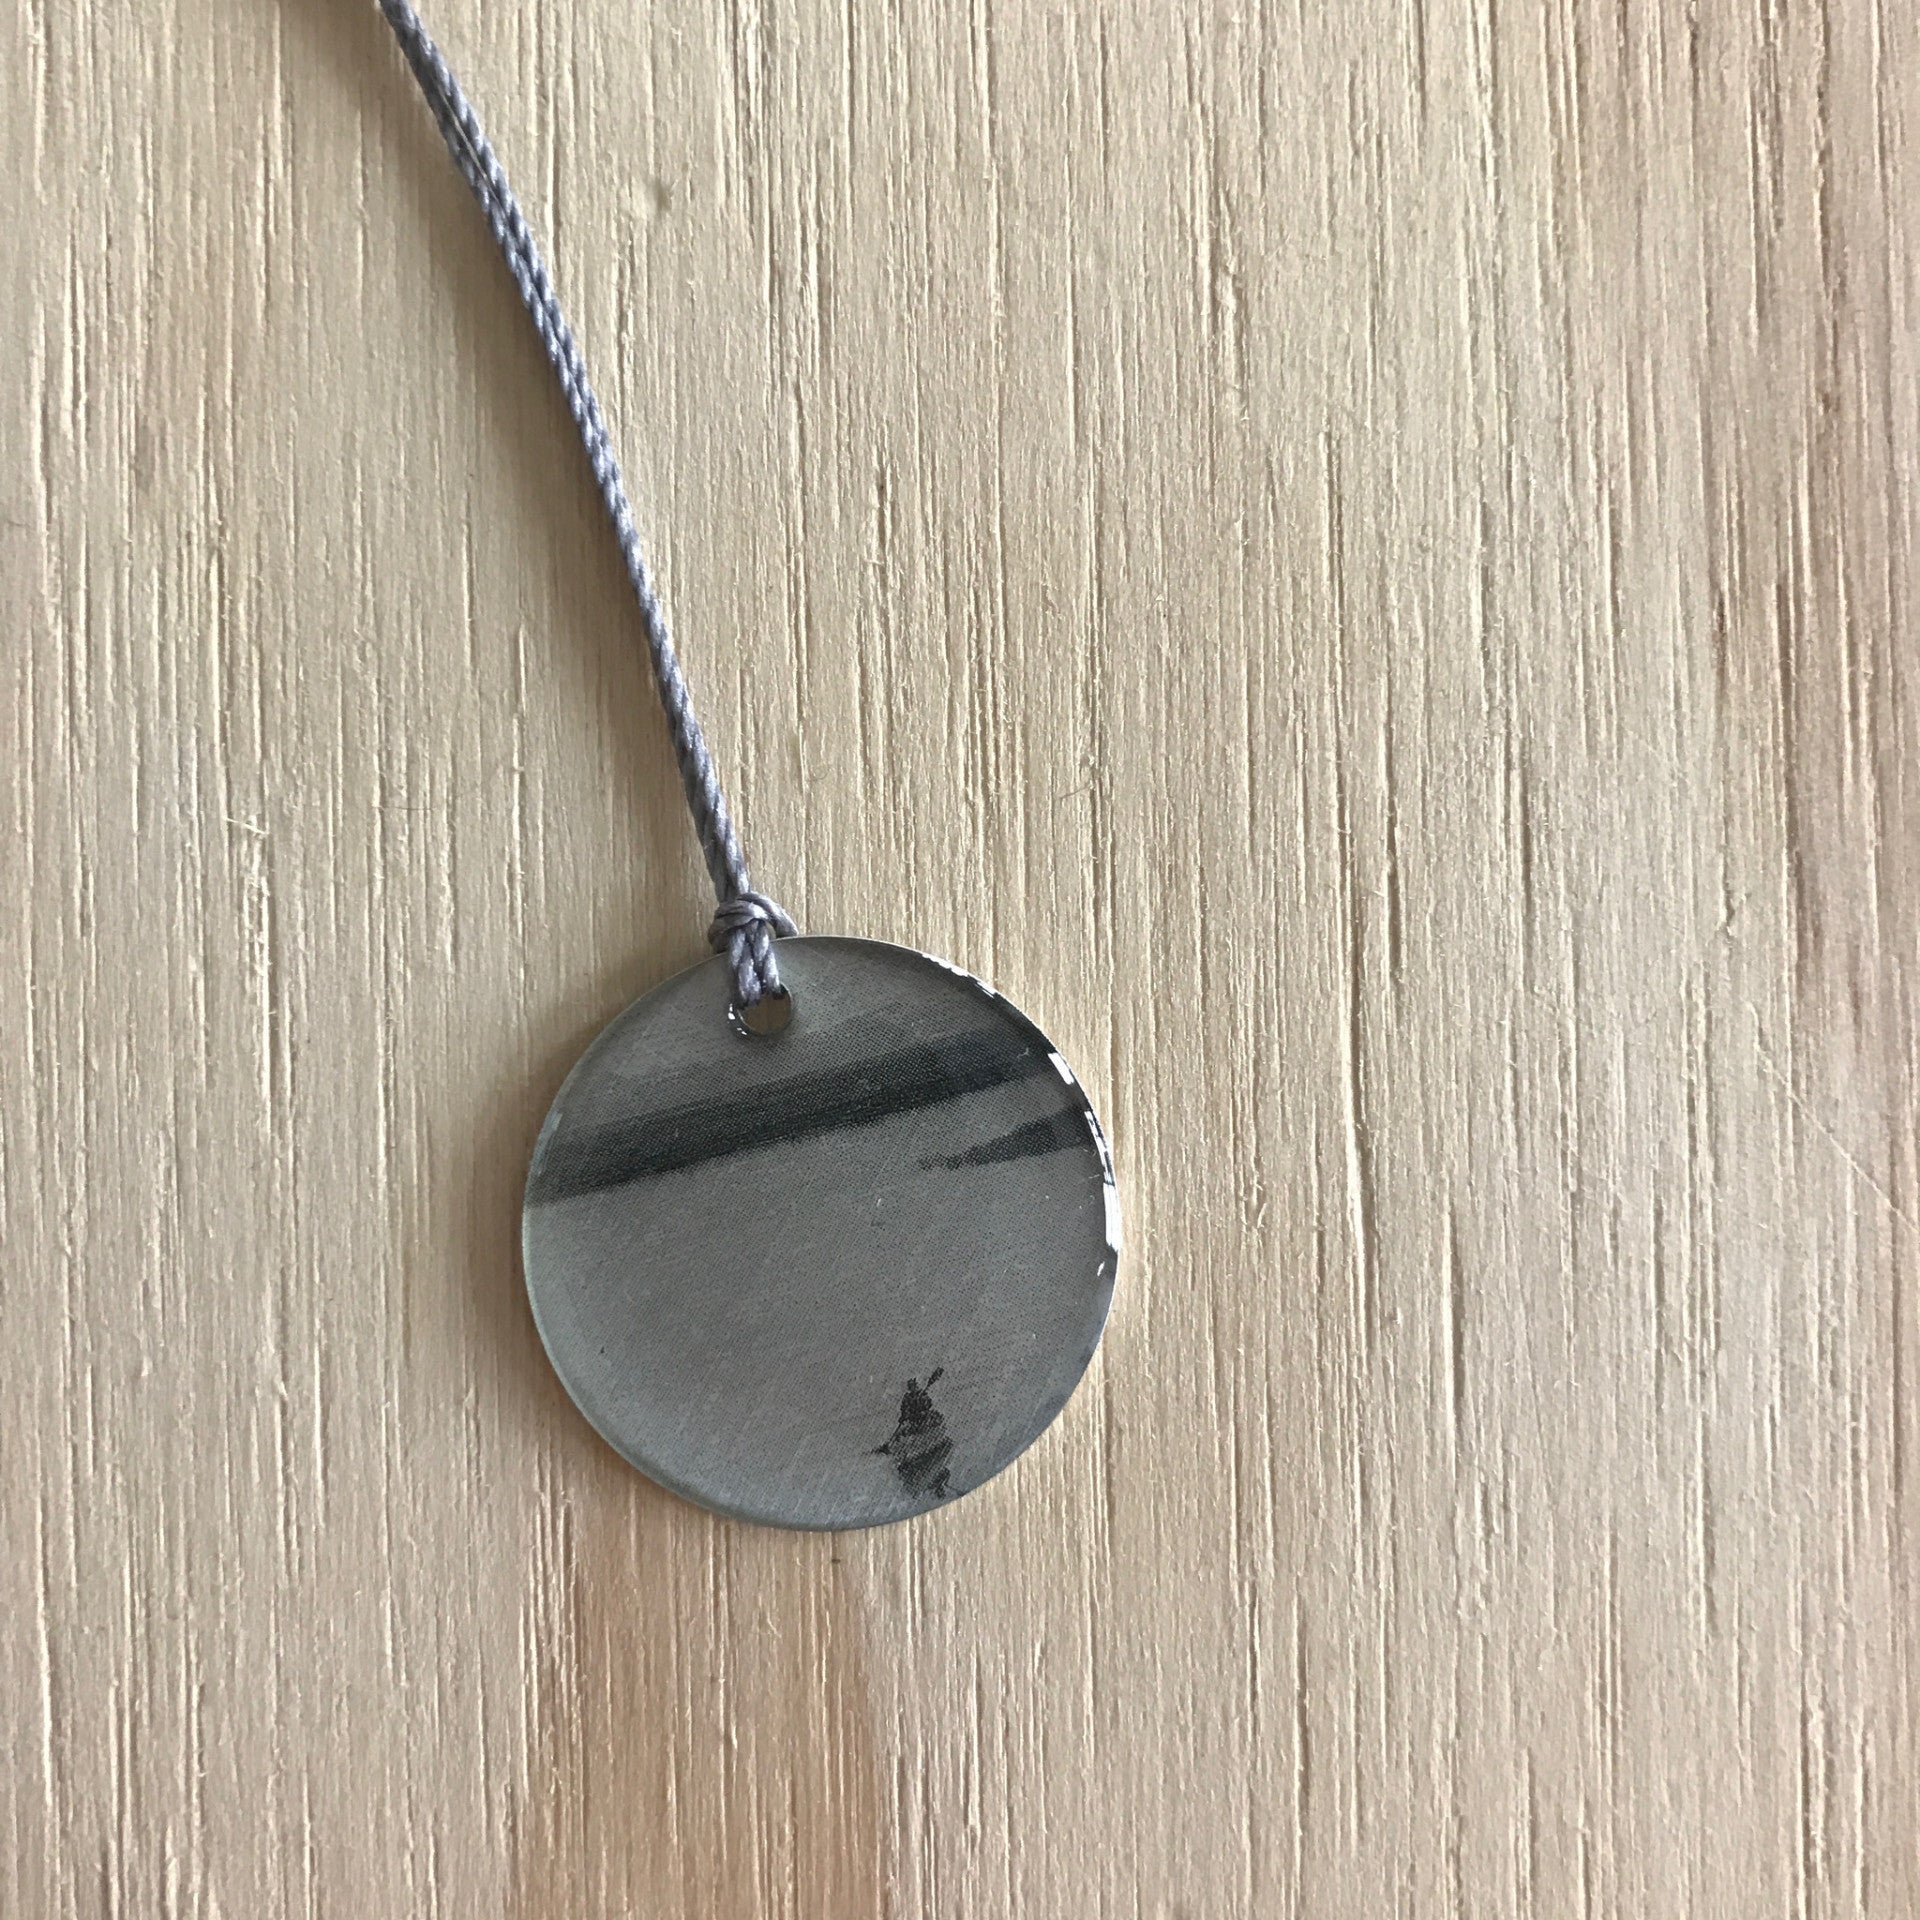 Canoeing Photo Necklace by Everyday Artifact - Upstate MN 